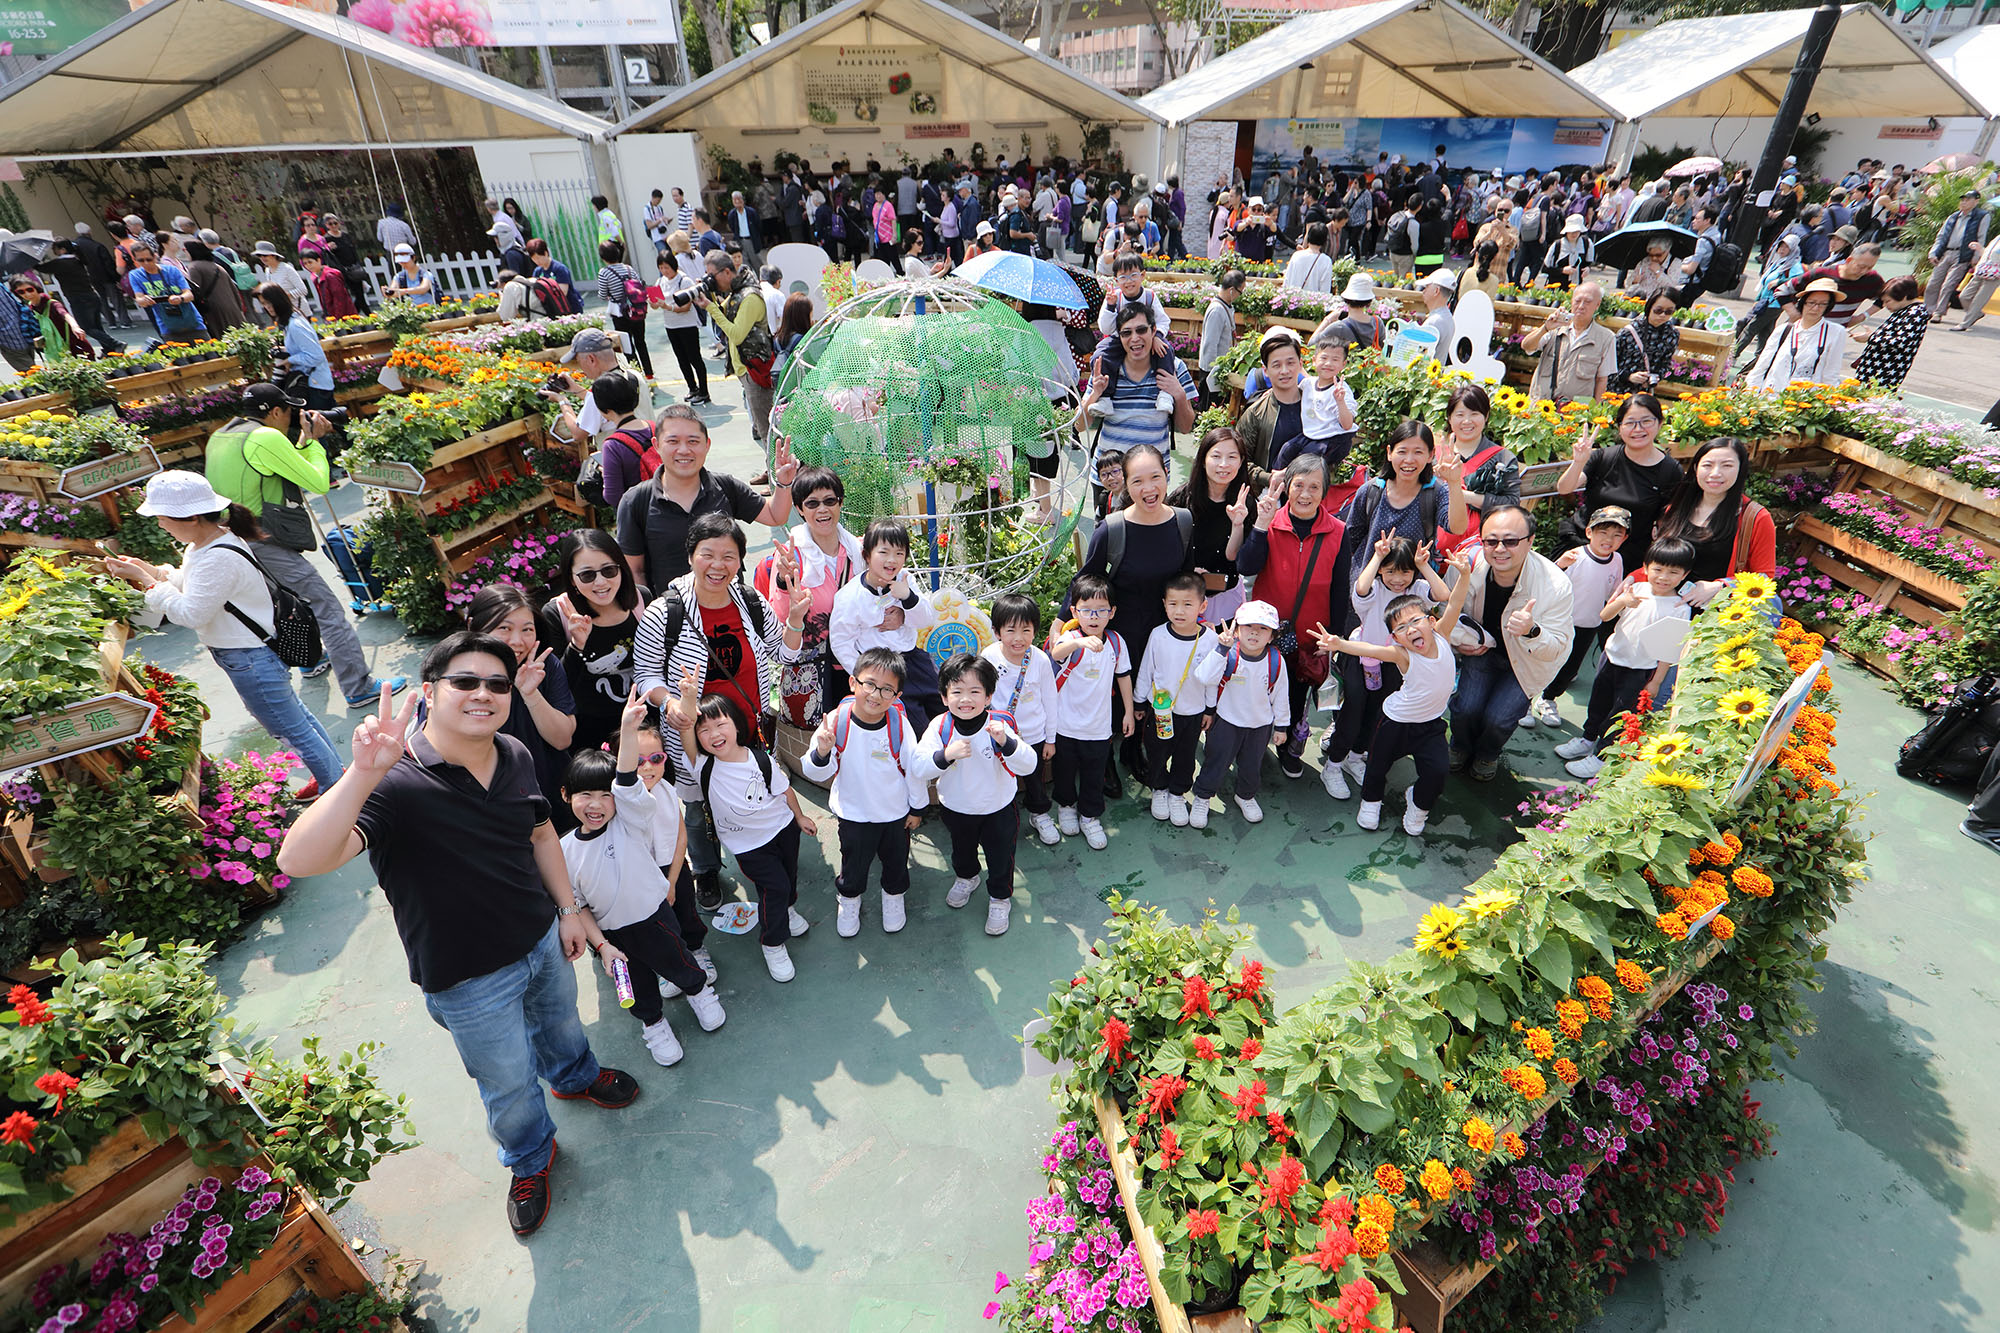 We took part in the annual Hong Kong Flower Show and won notable accolades for our efforts.